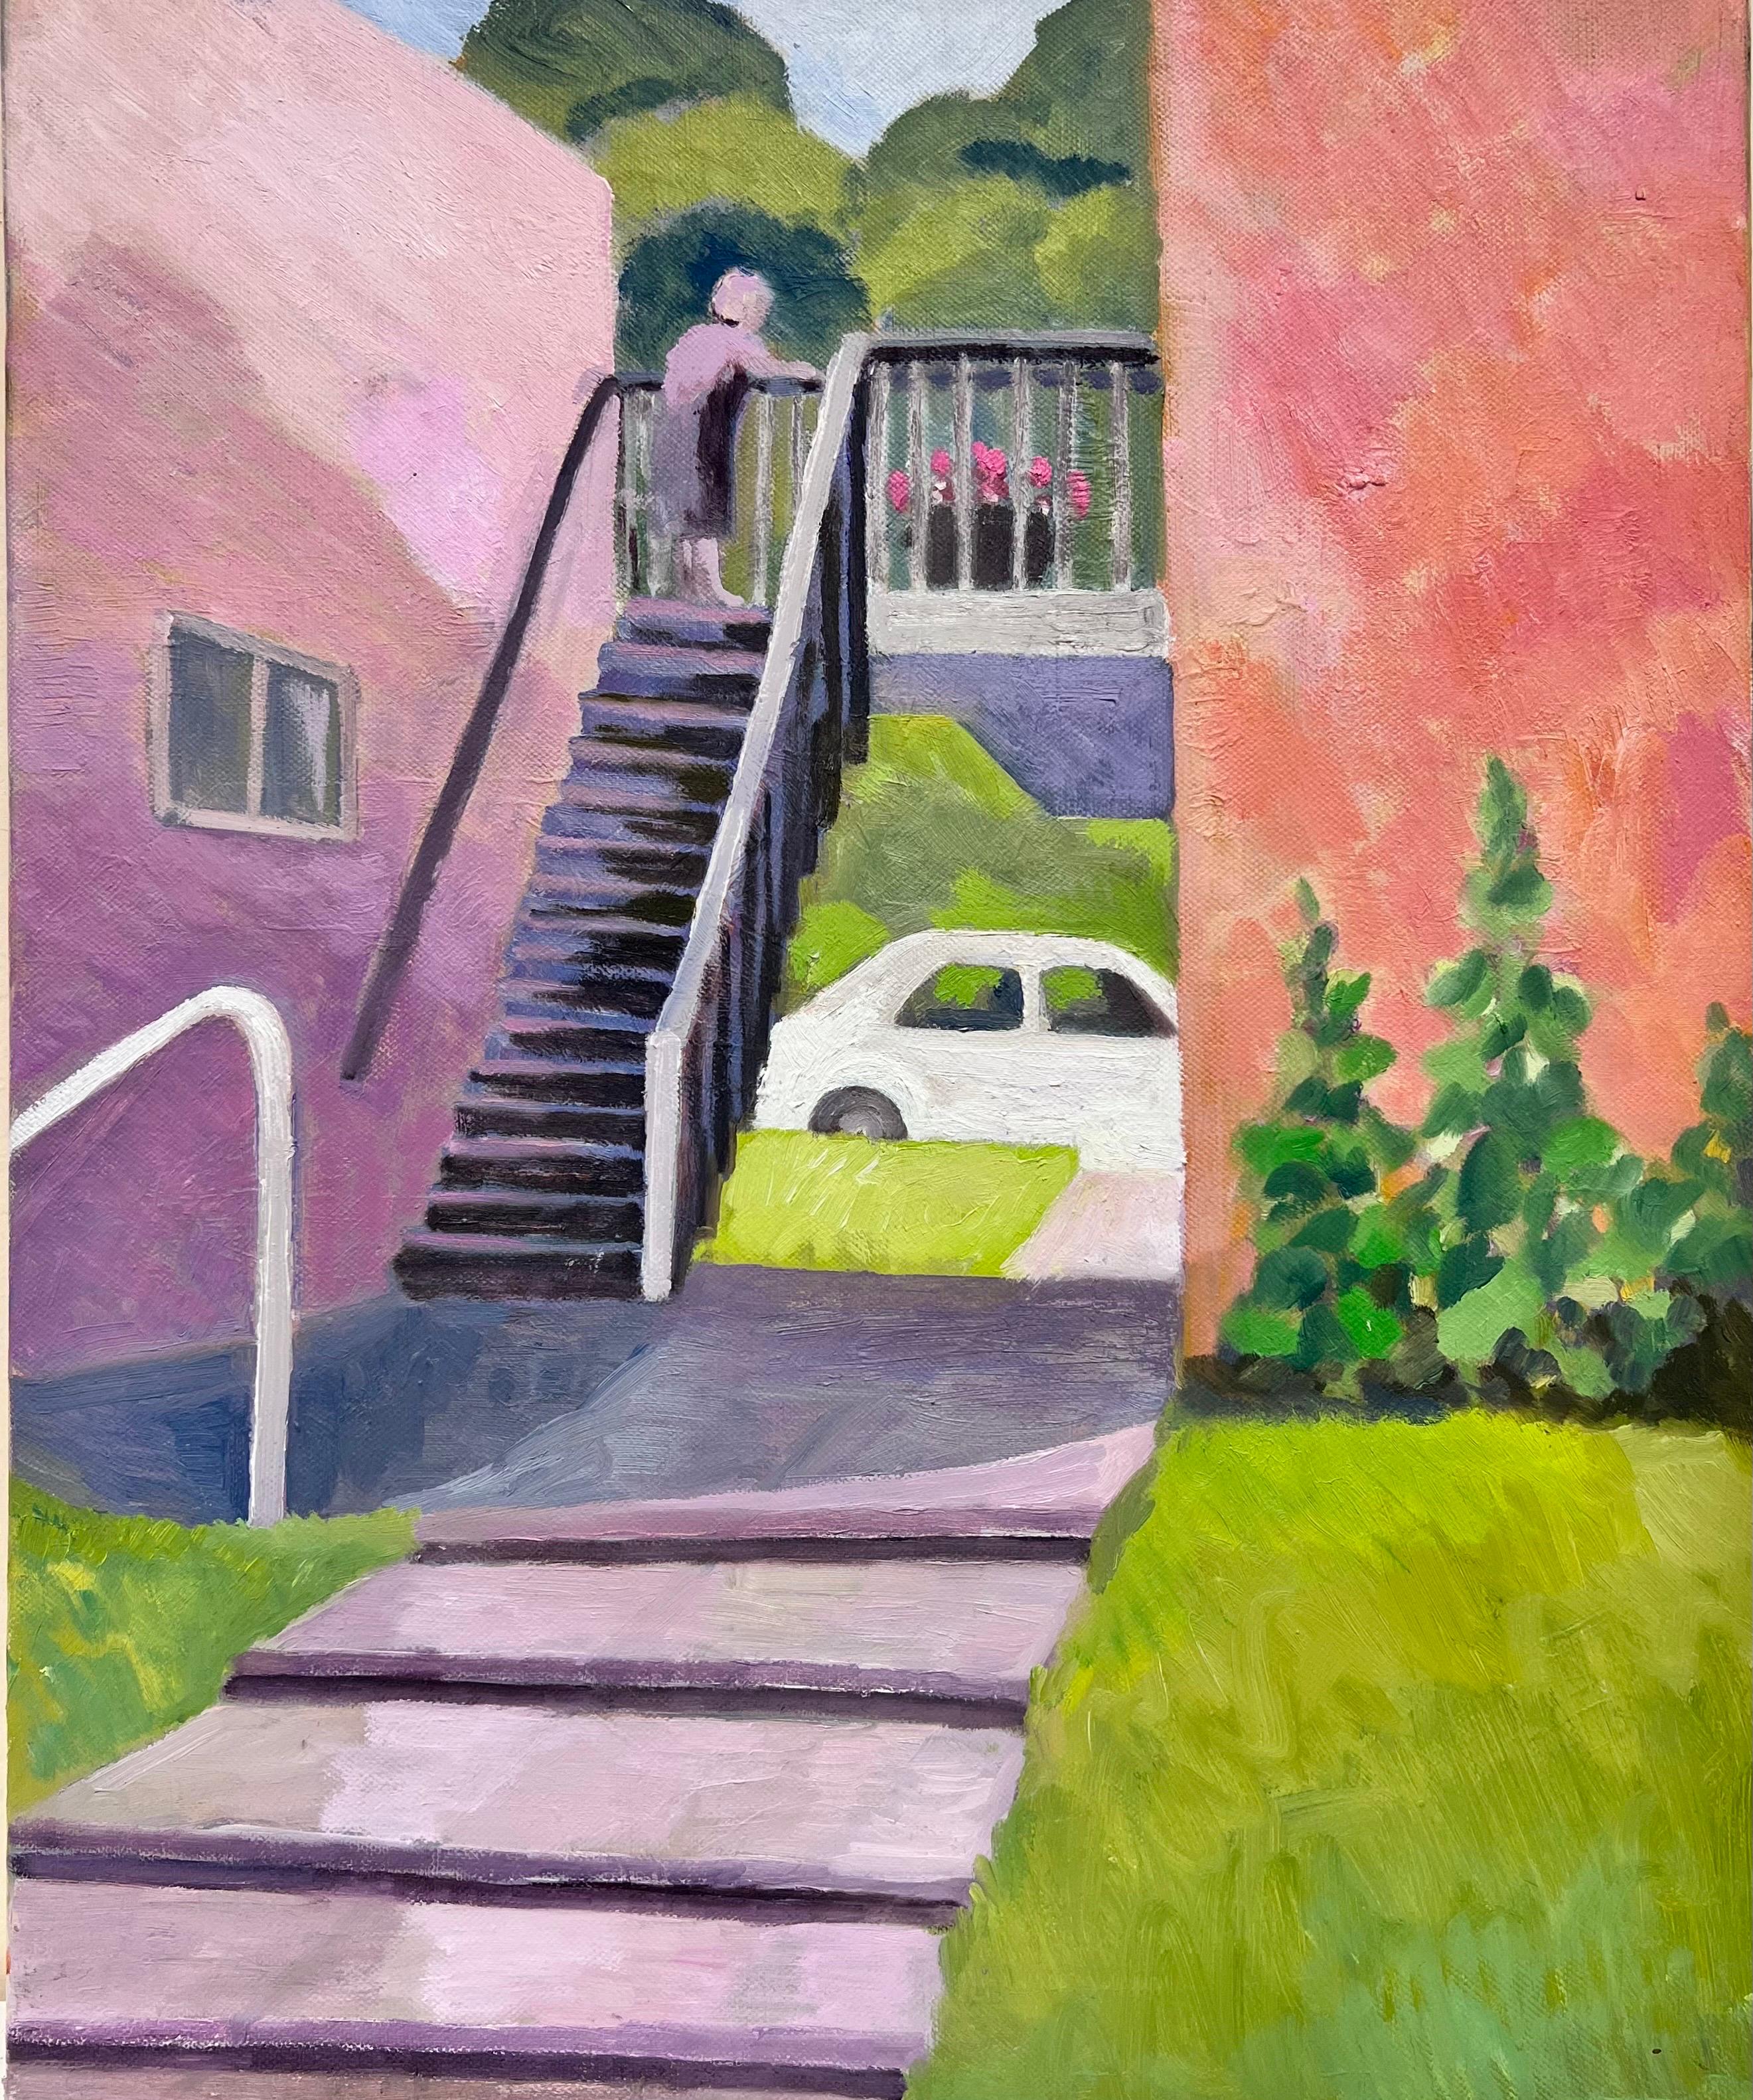 Jill Jackson Landscape Painting - Contemporary British Painting Lady on Garden Steps, Terracotta Pinks & Greens